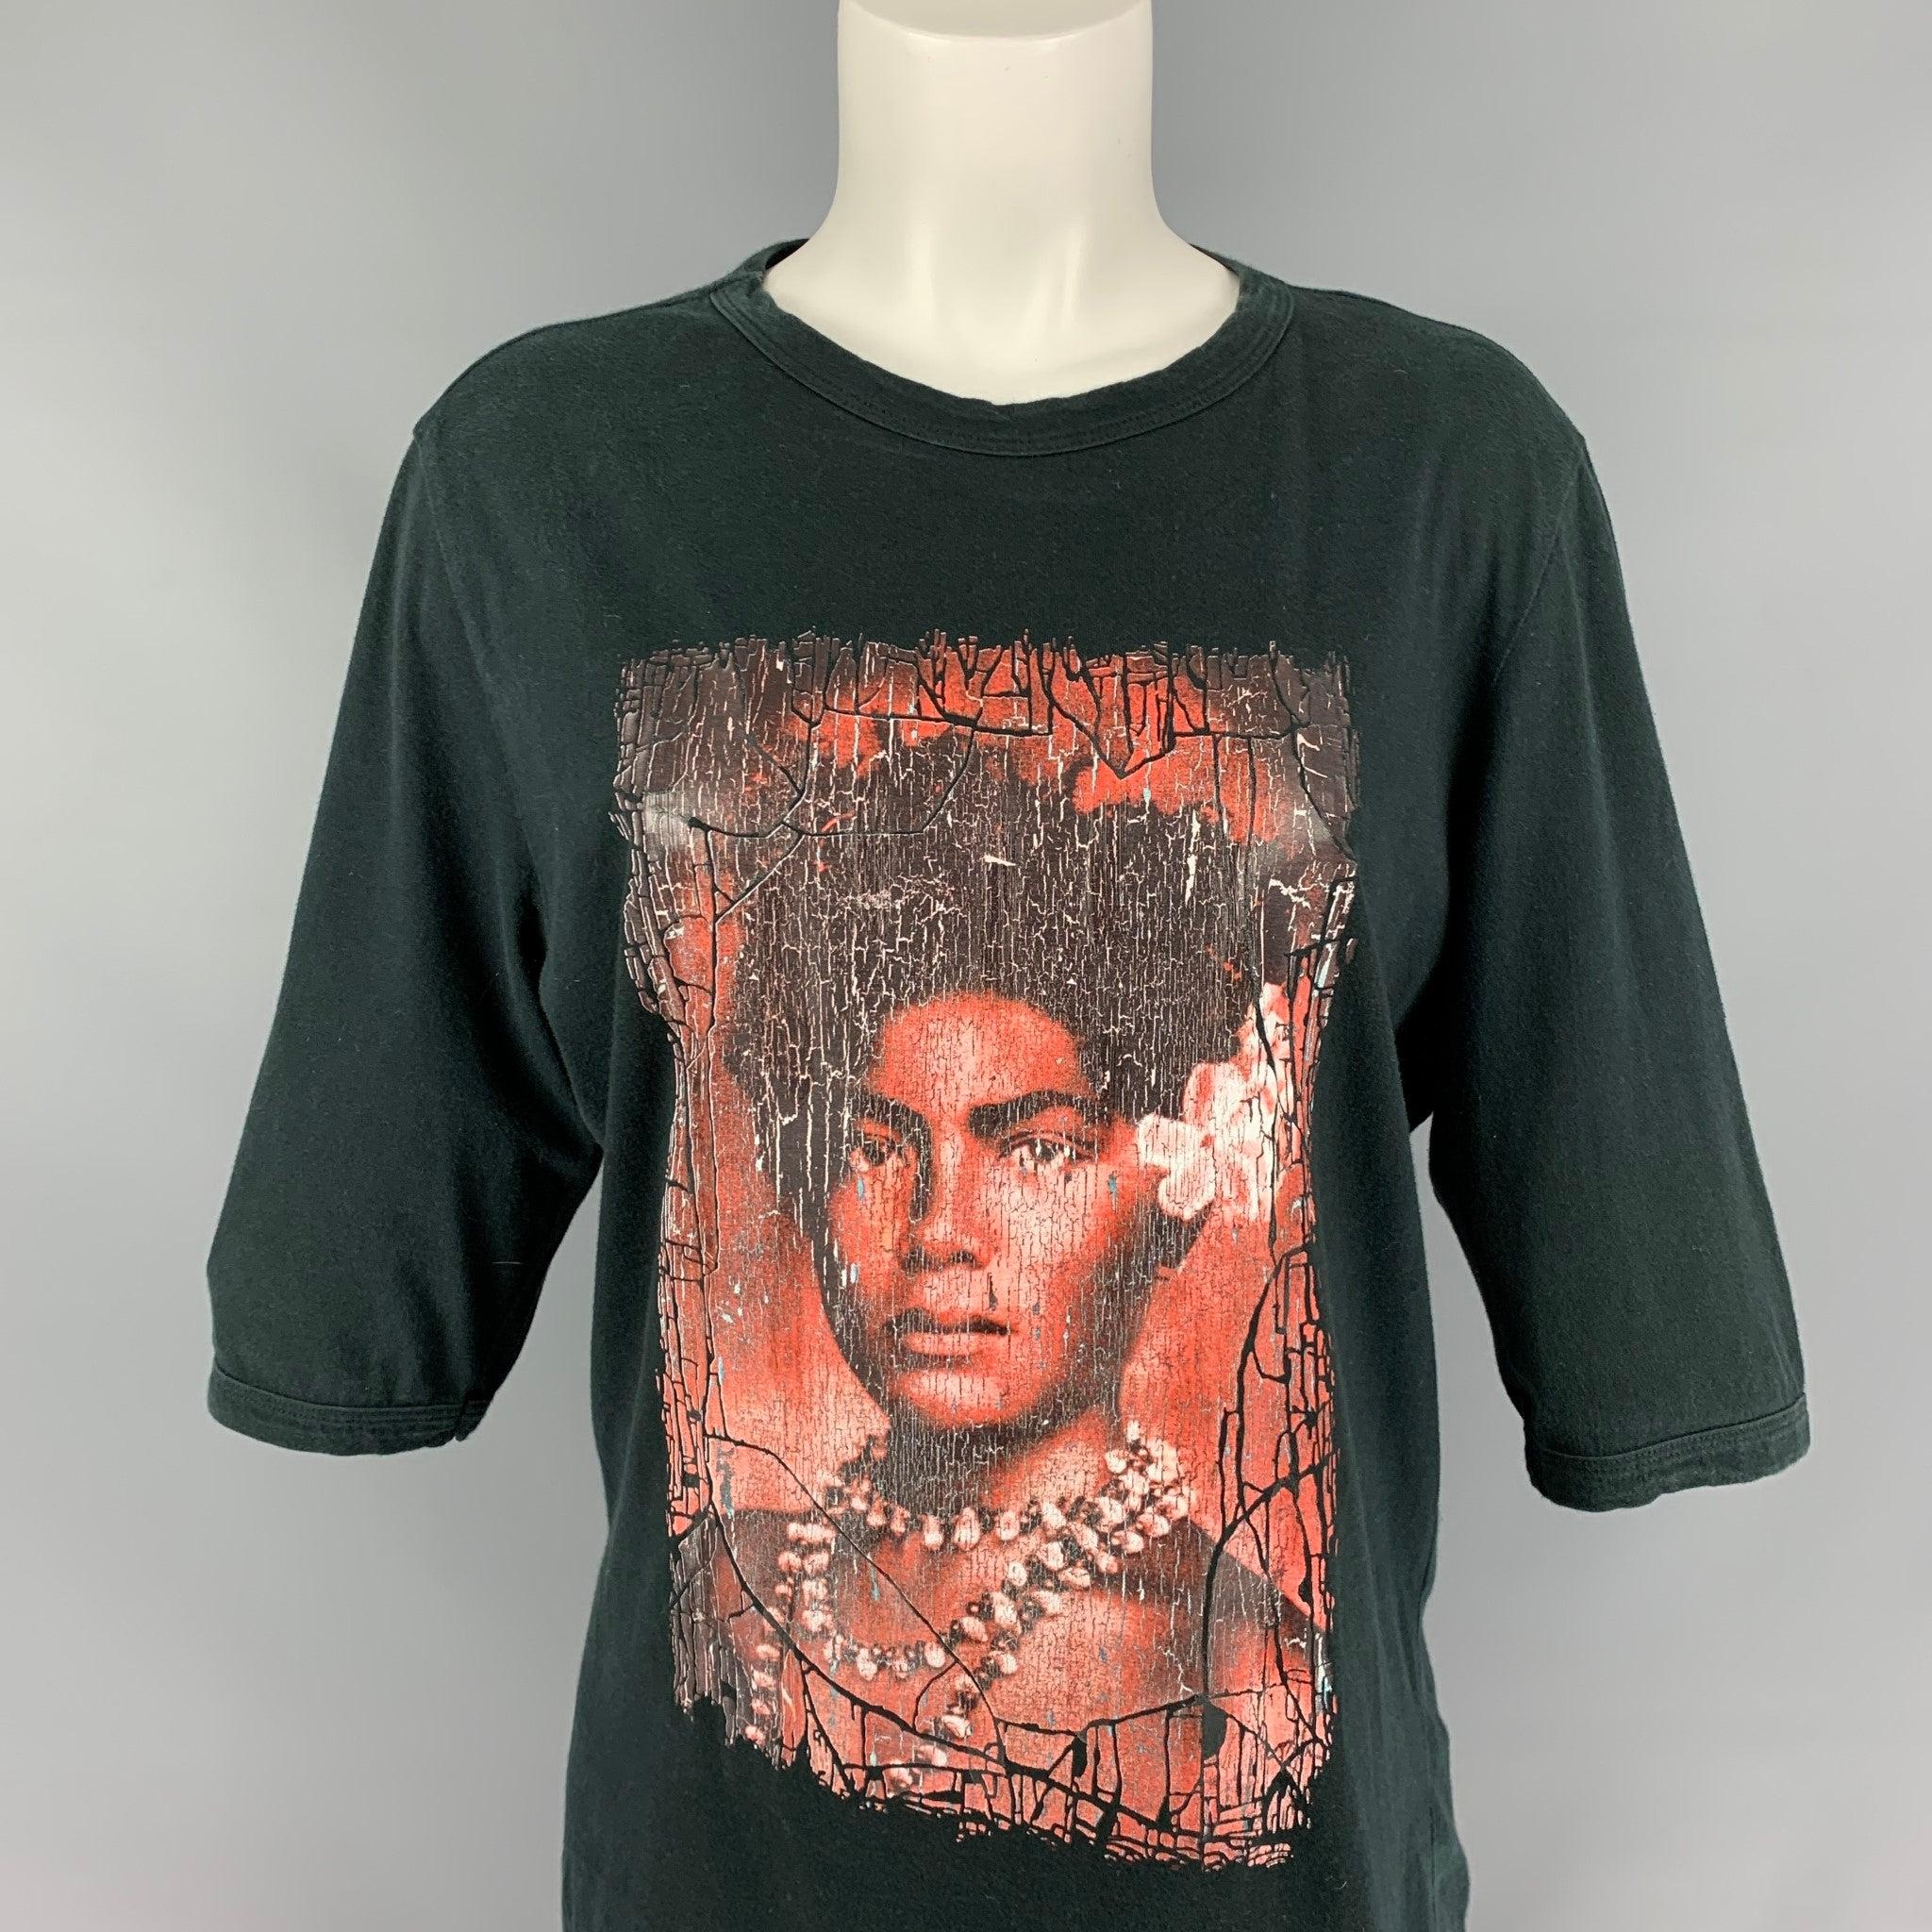 Vintage JEAN PAUL GAULTIER t-shirt comes in a black cotton featuring a graphic design and a crew-neck. Made in Italy.
Good
Pre-Owned Condition. 

Marked:   I 52 / E 52 / GB 42 / USA 42 

Measurements: 
 
Shoulder: 17 inches  Bust: 40 inches  Sleeve: